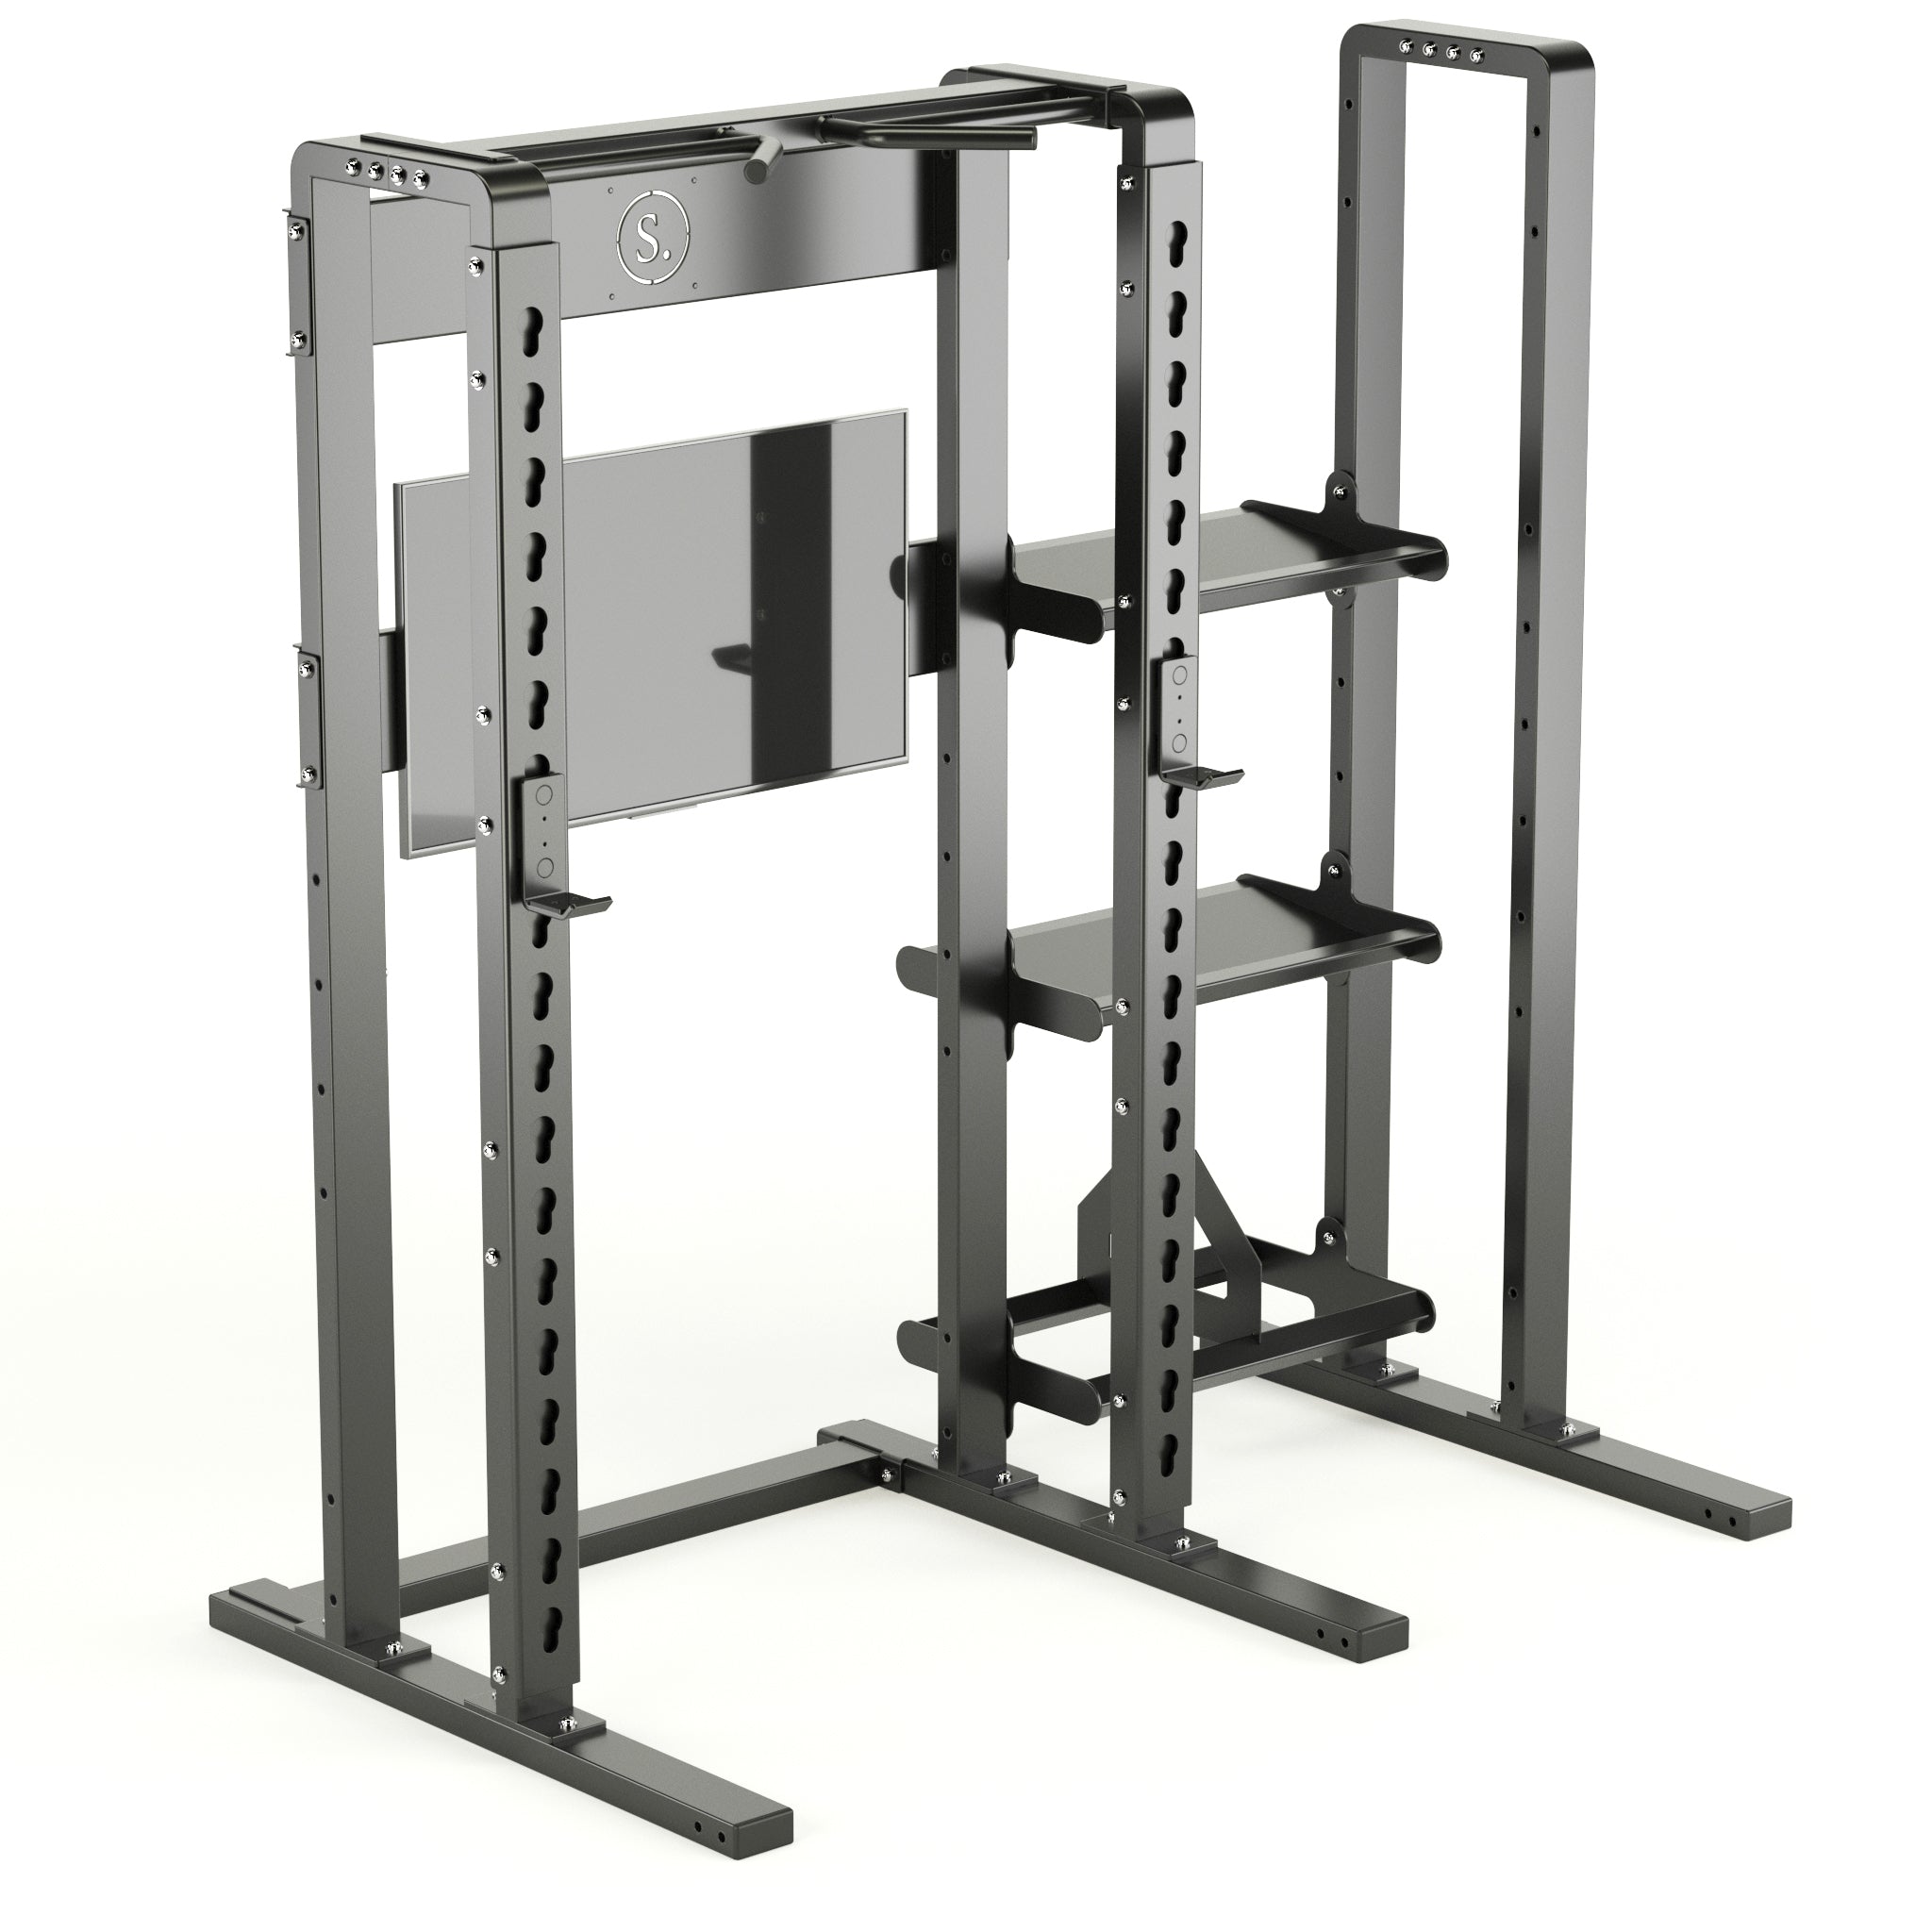 Solo Half Rack Plus with compact storage in black